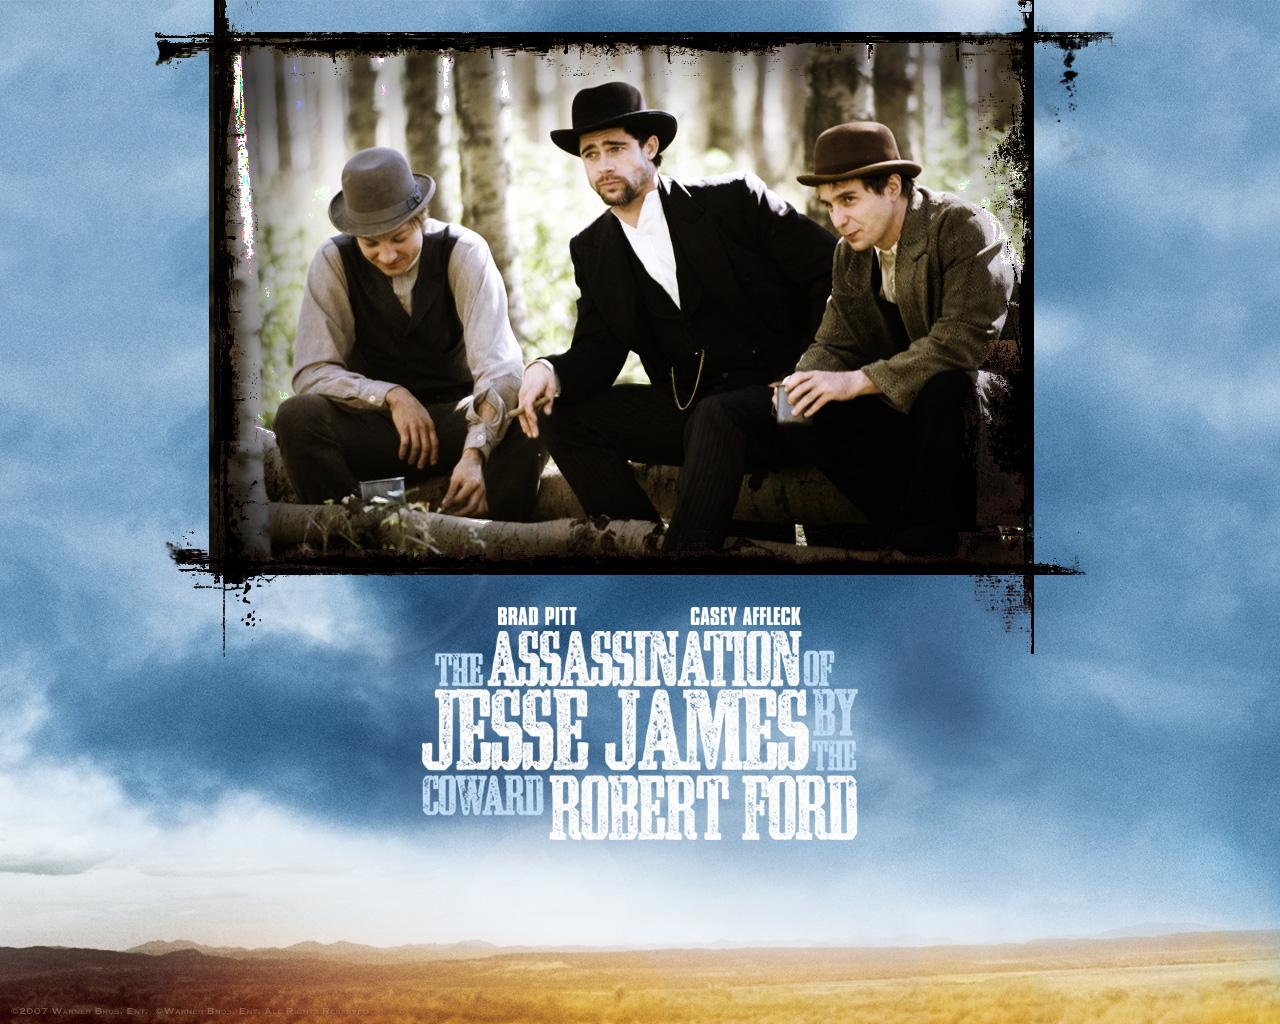 The Assassination Of Jesse James By The Coward Robert Ford Wallpaper HD - Assassination Of Jesse James By The Coward Robert Ford